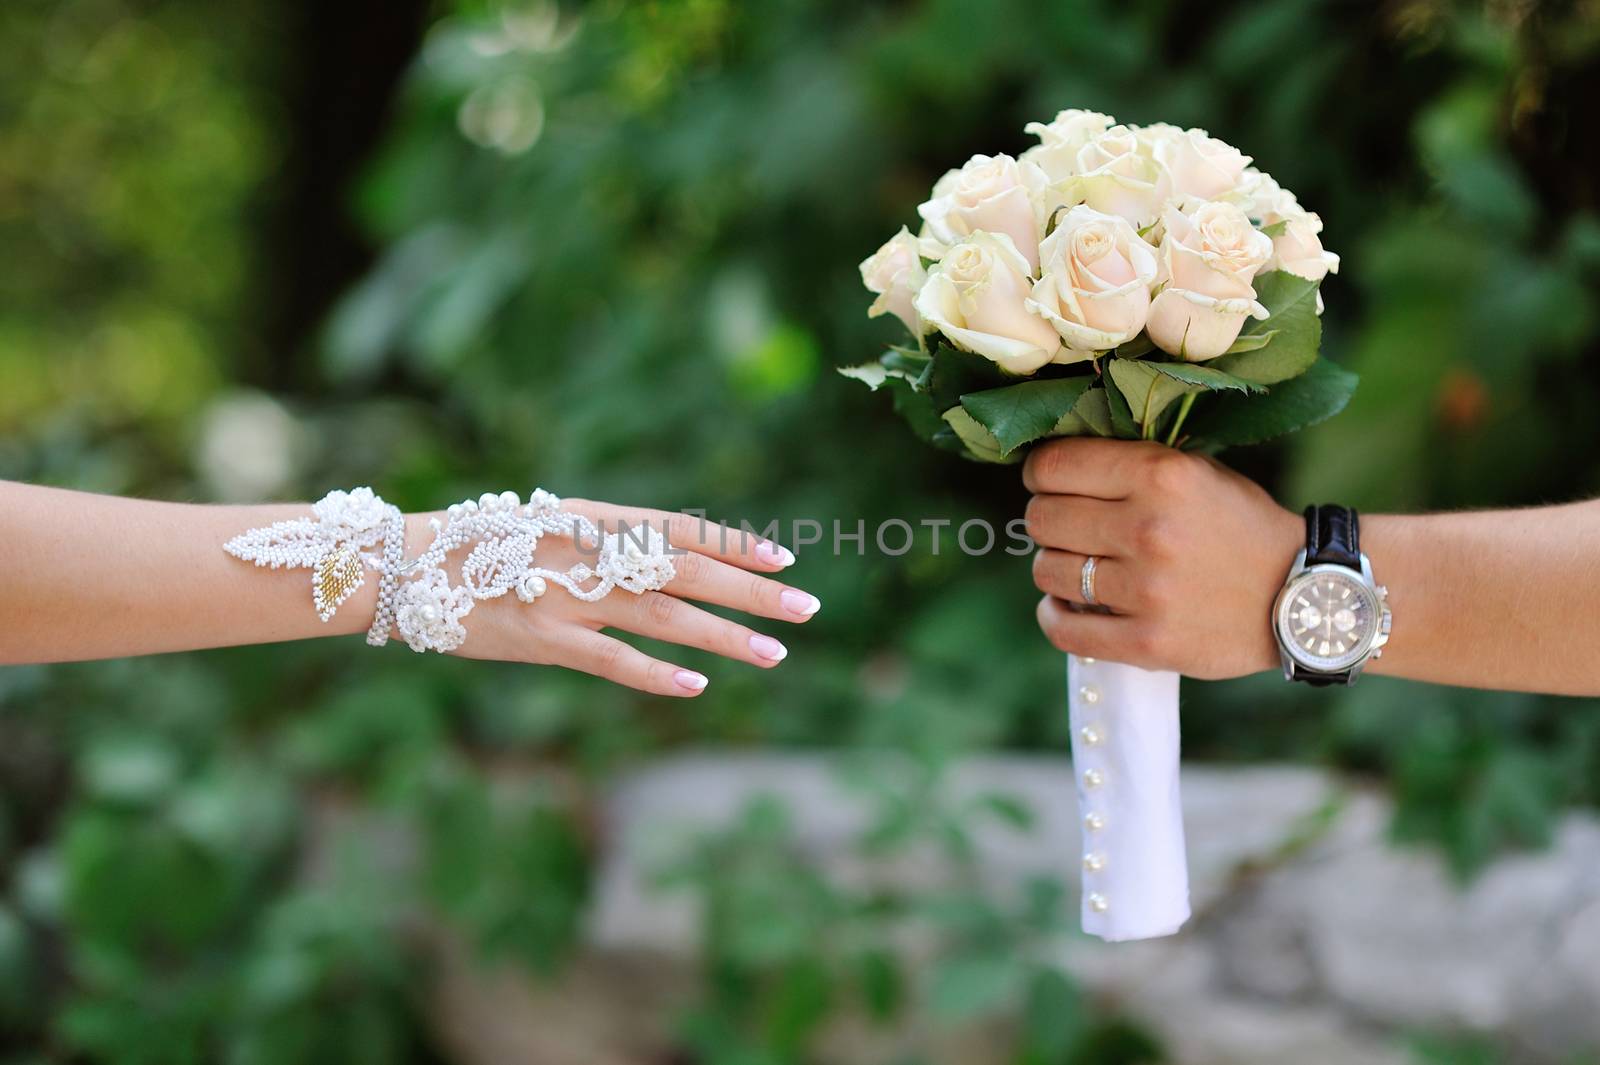 Groom transmits give bride wedding bouquet of white roses by timonko